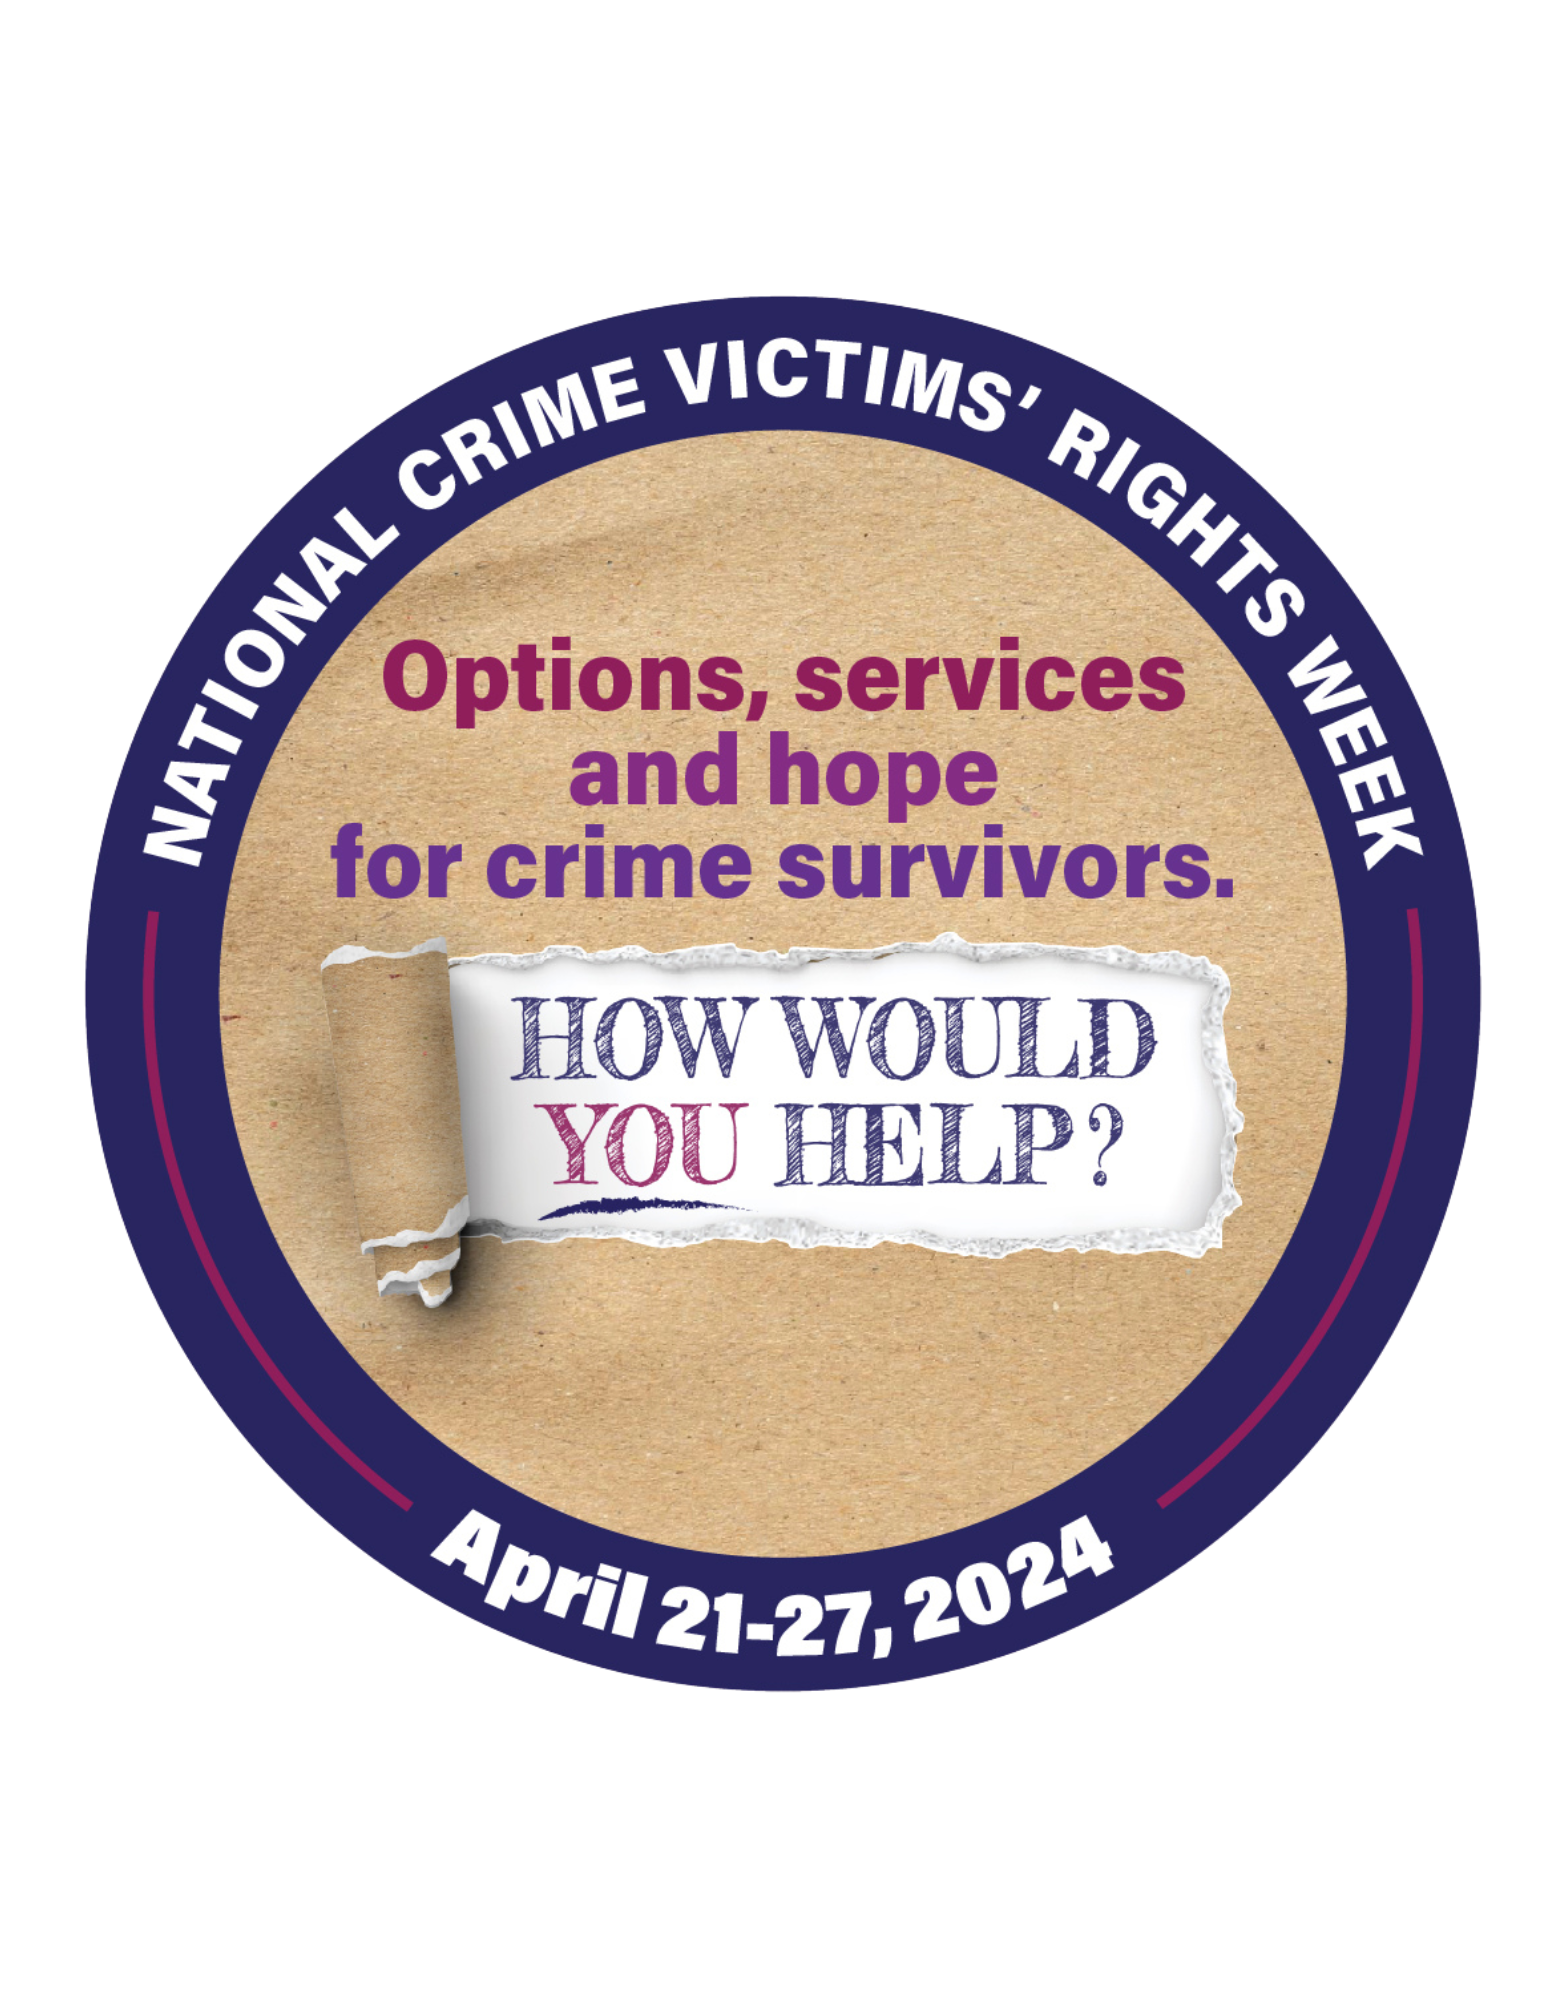 Image 1: National Crime Victims' Rights Week